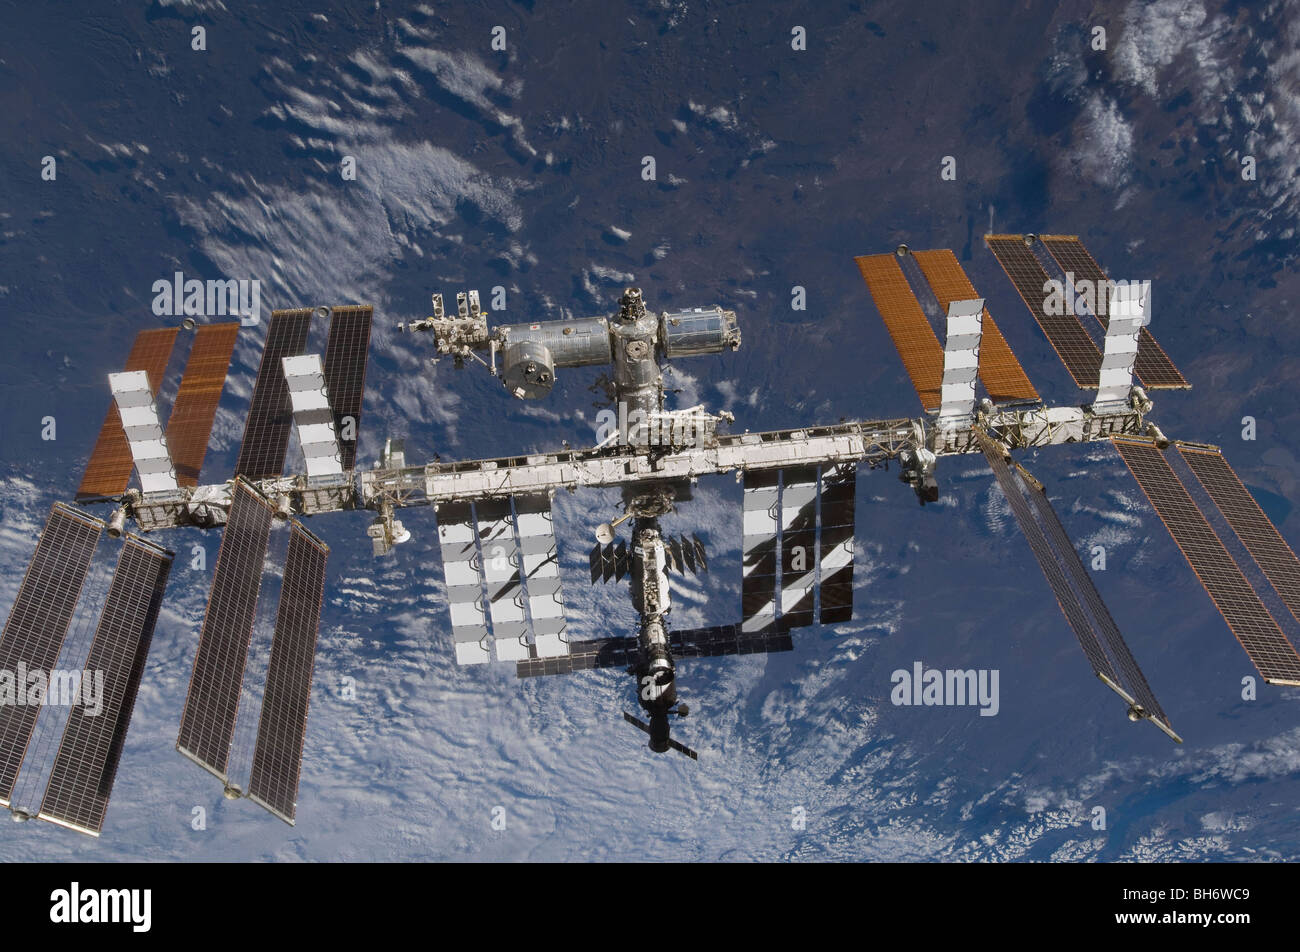 November 25, 2009 - The International Space Station in orbit above Earth. Stock Photo